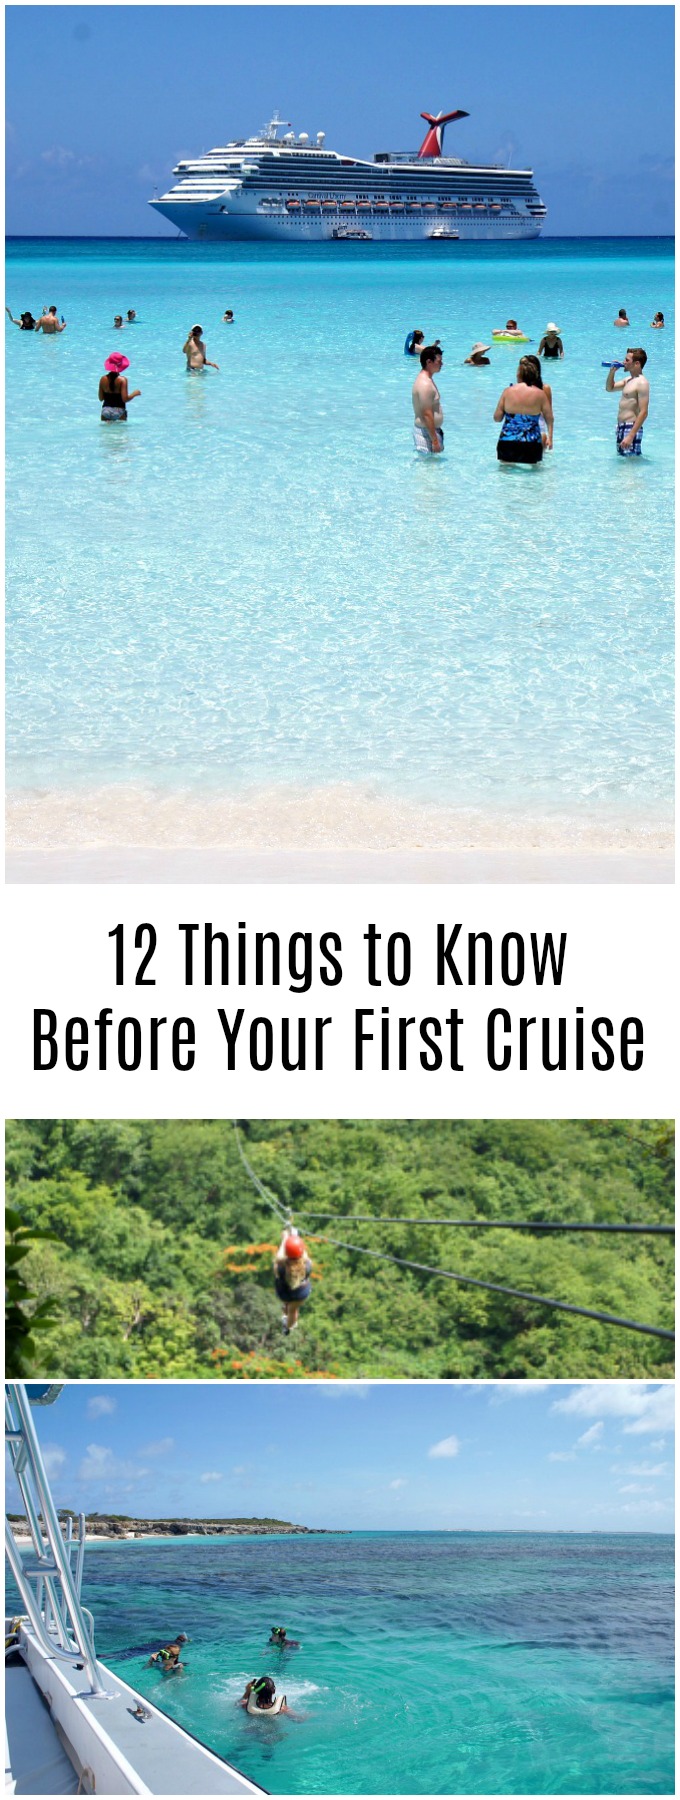 12 Things to Know Before Your First Cruise